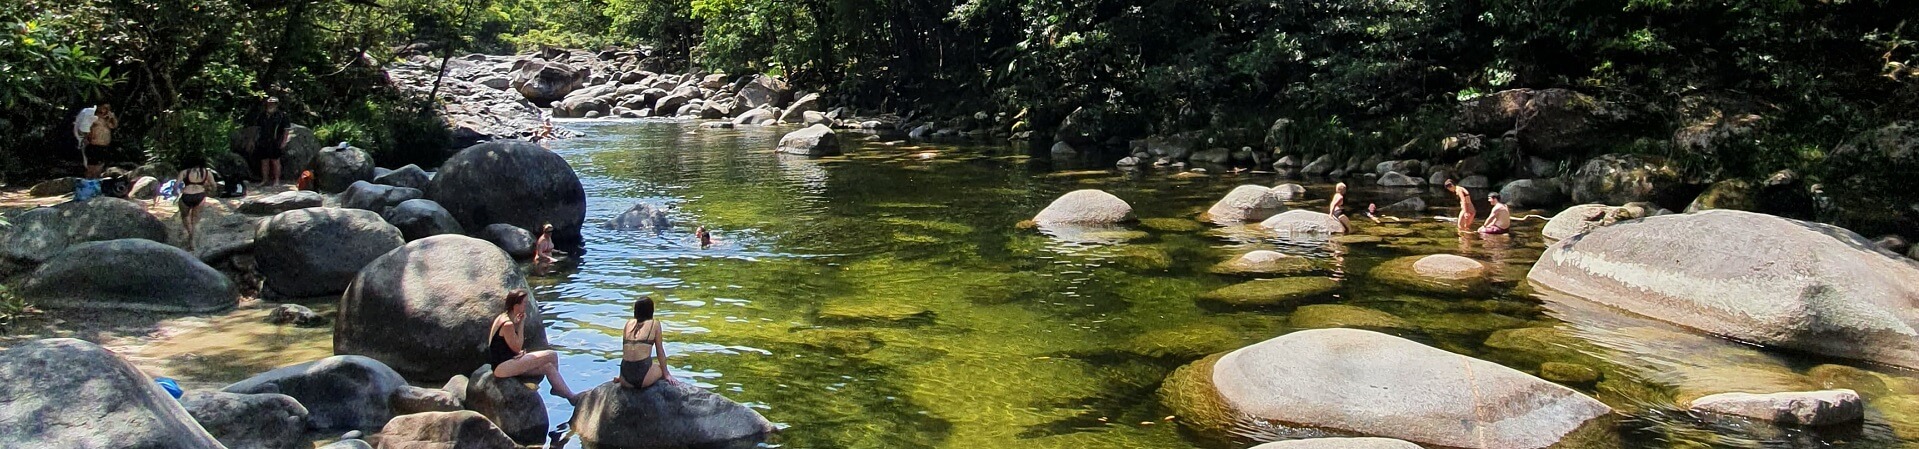 Are there crocodiles in the Mossman Gorge?